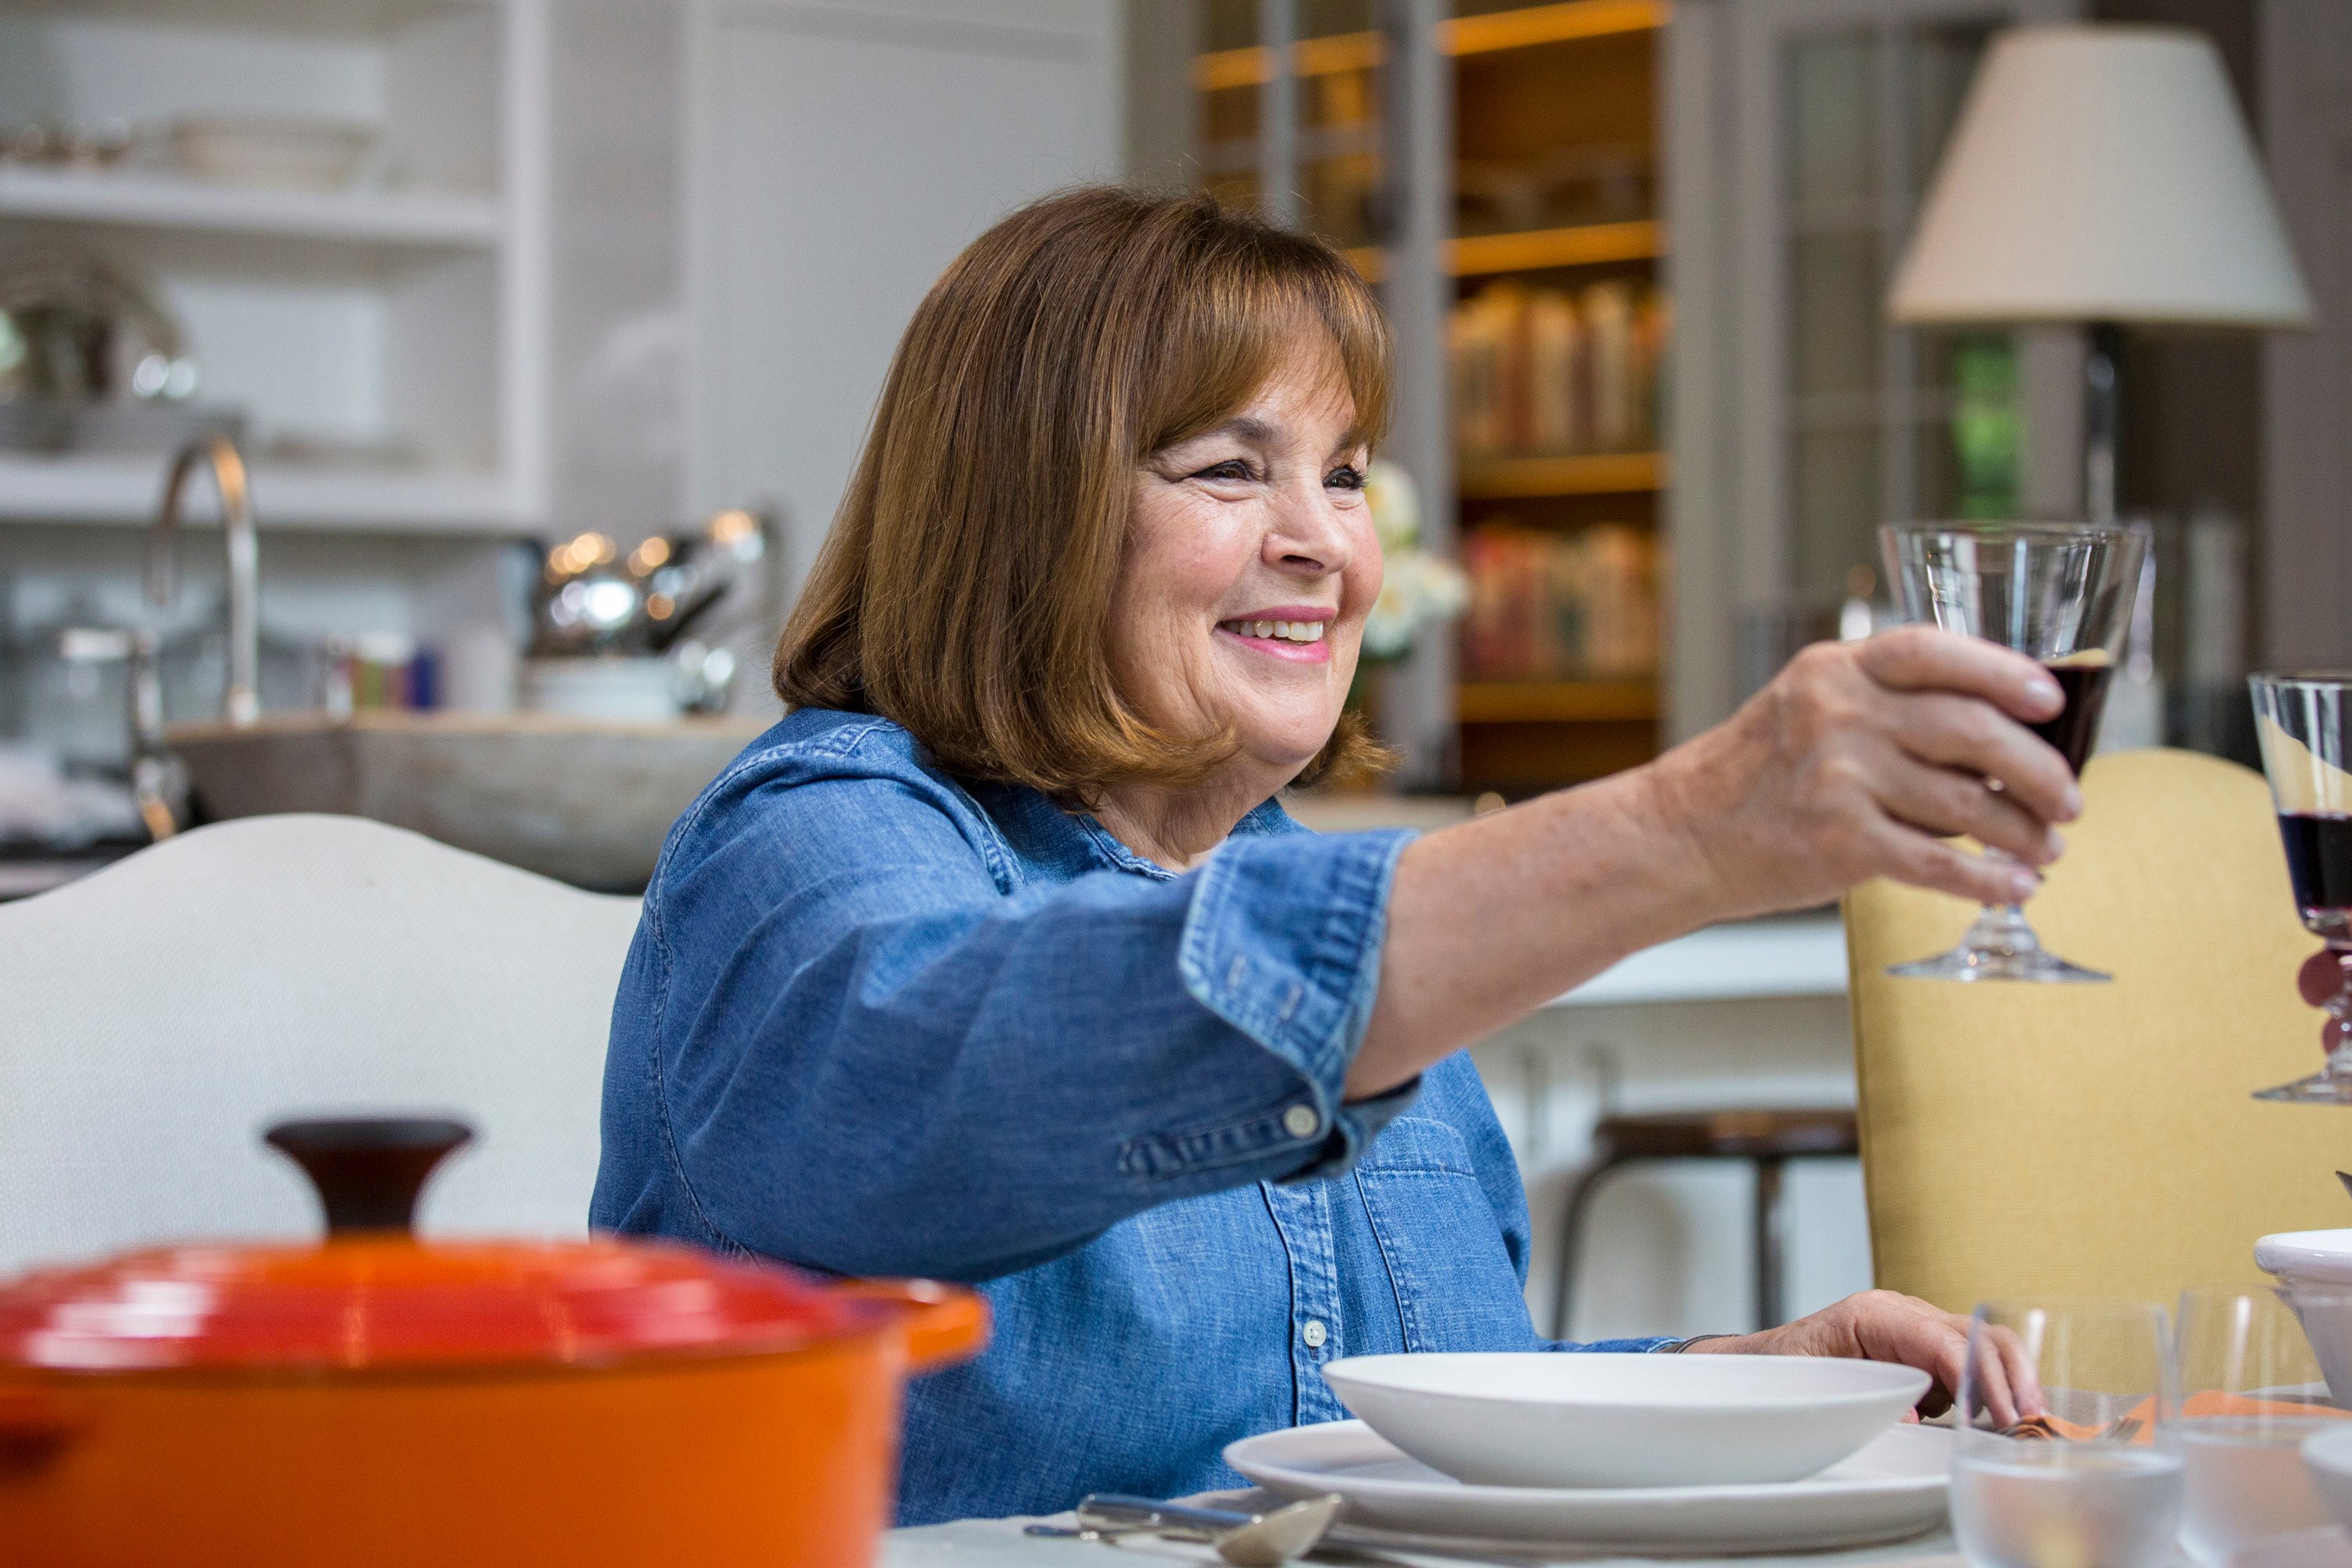 Ina Garten | Mike Smith/NBCU Photo Bank/NBCUniversal via Getty Images via Getty Images